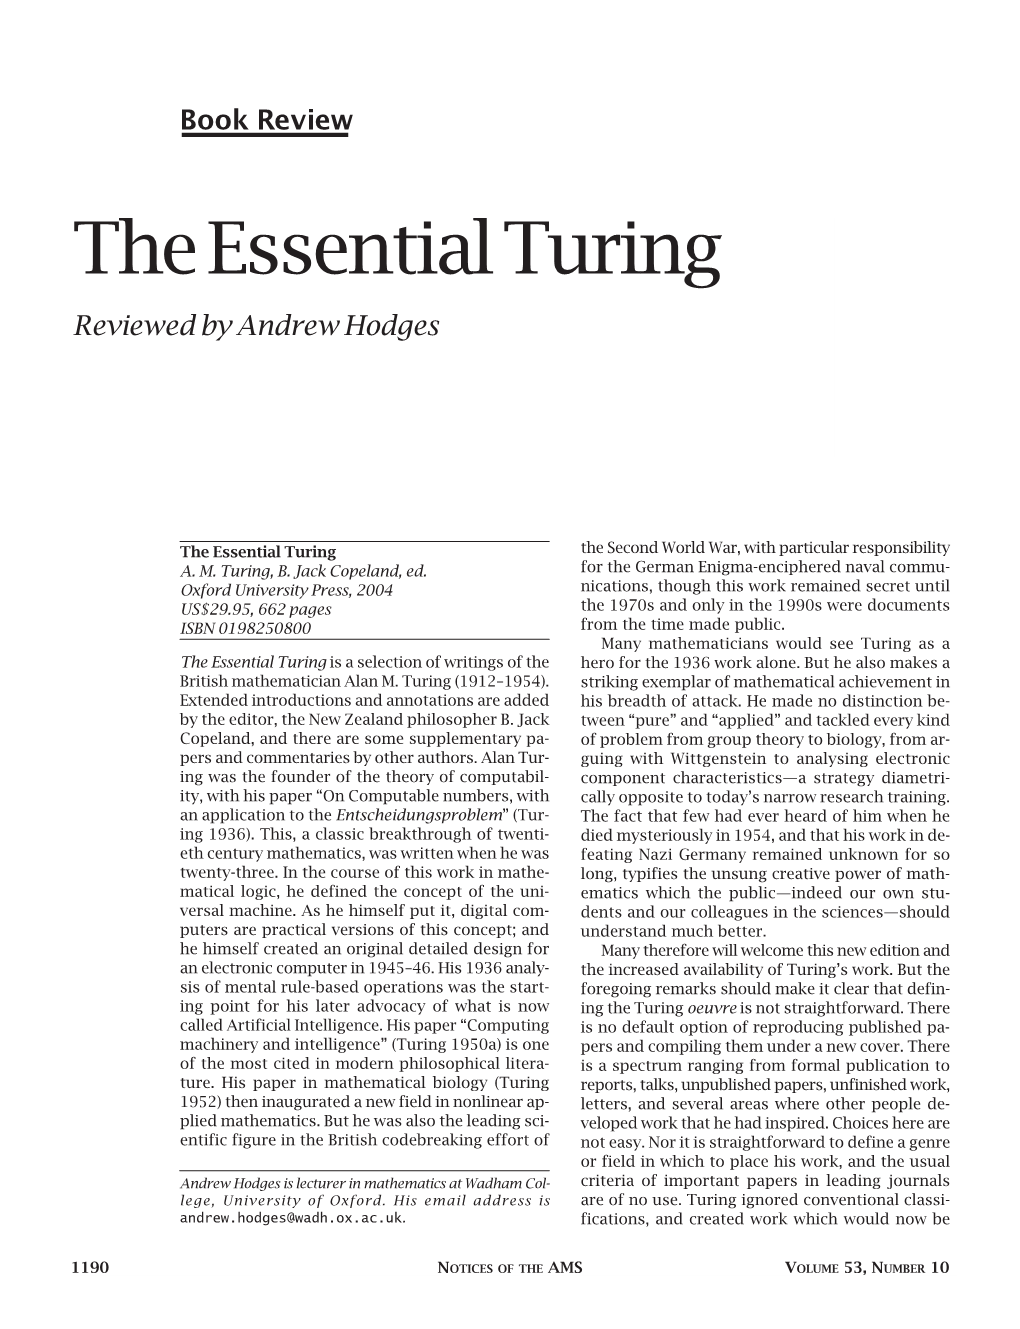 The Essential Turing Reviewed by Andrew Hodges